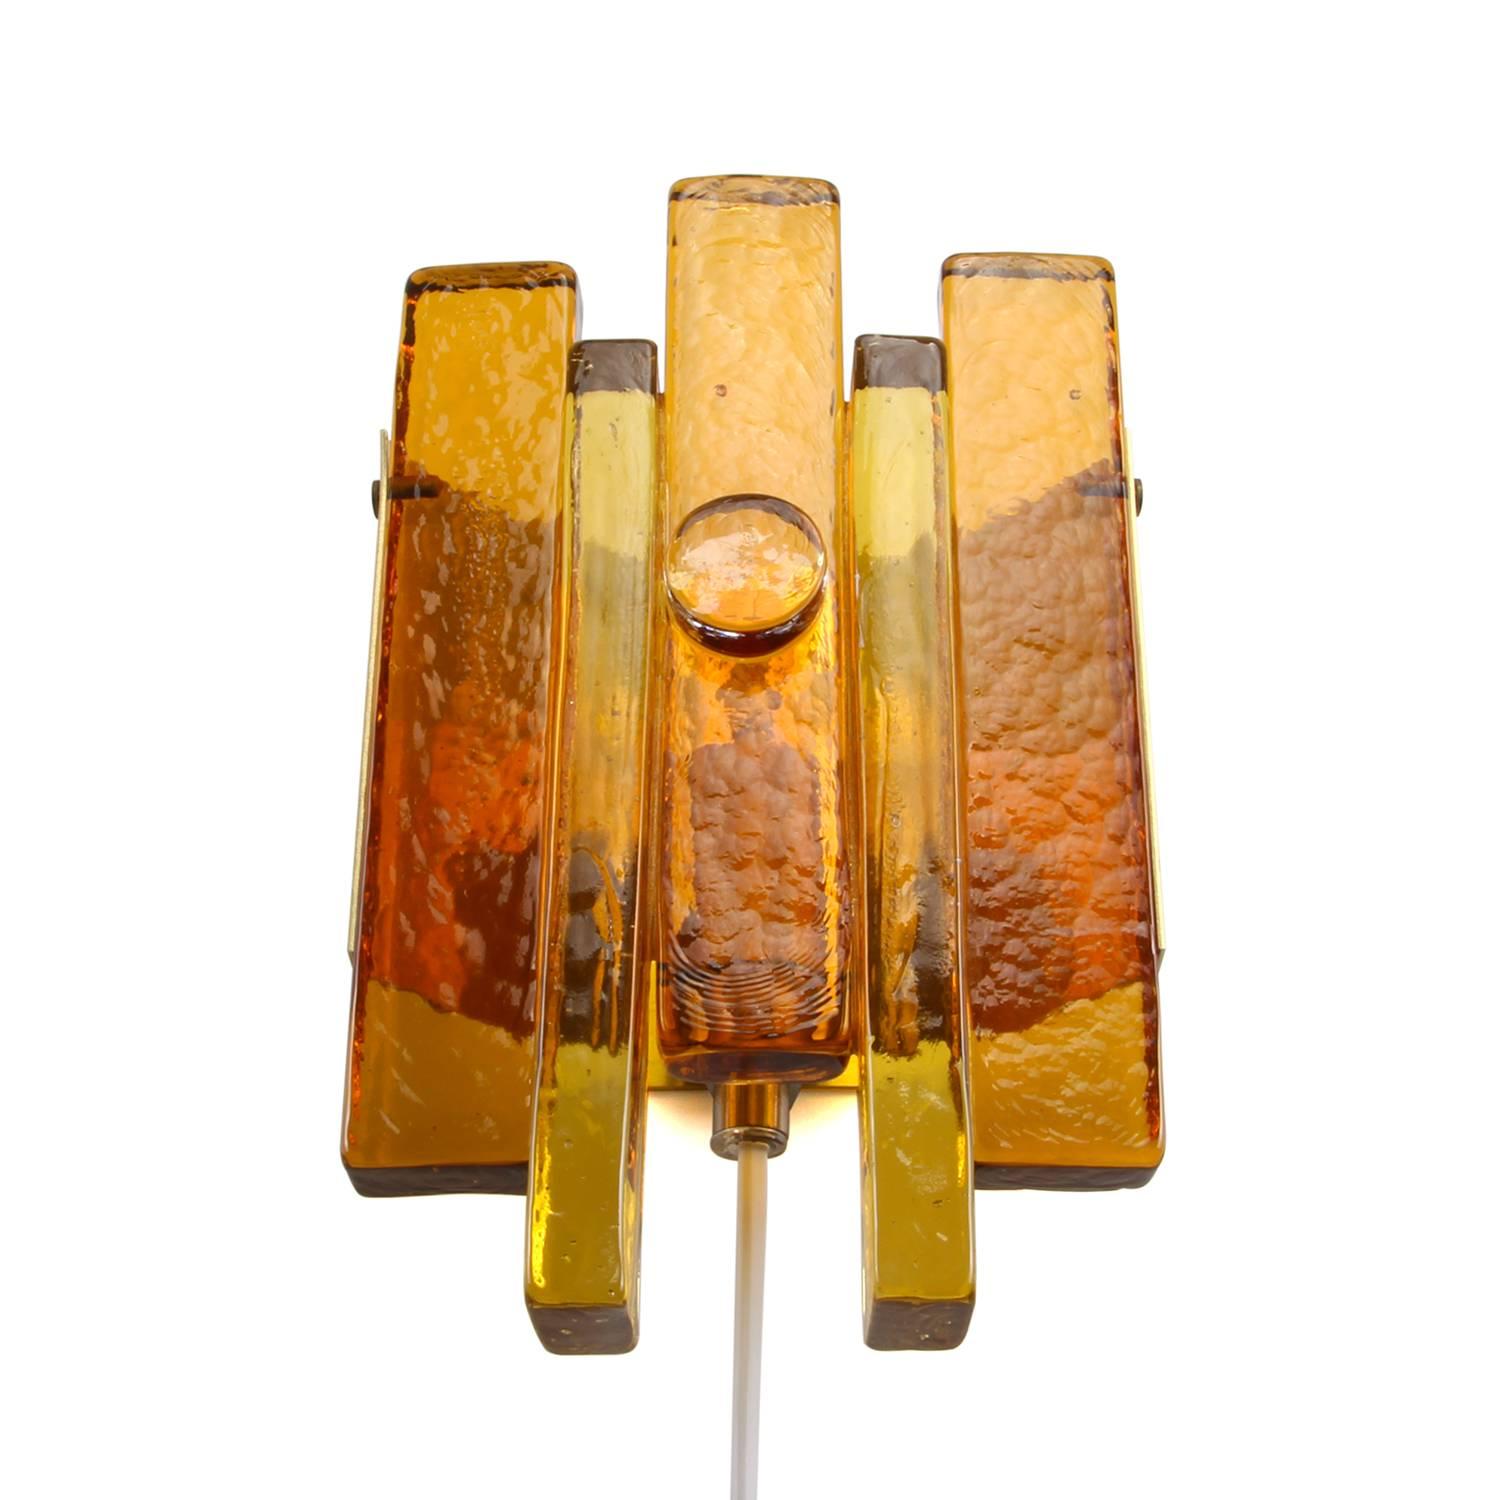 20th Century Glass Wall Light by Hassel & Teudt 1960s, Rustic Amber Glass and Brass Wall Lamp